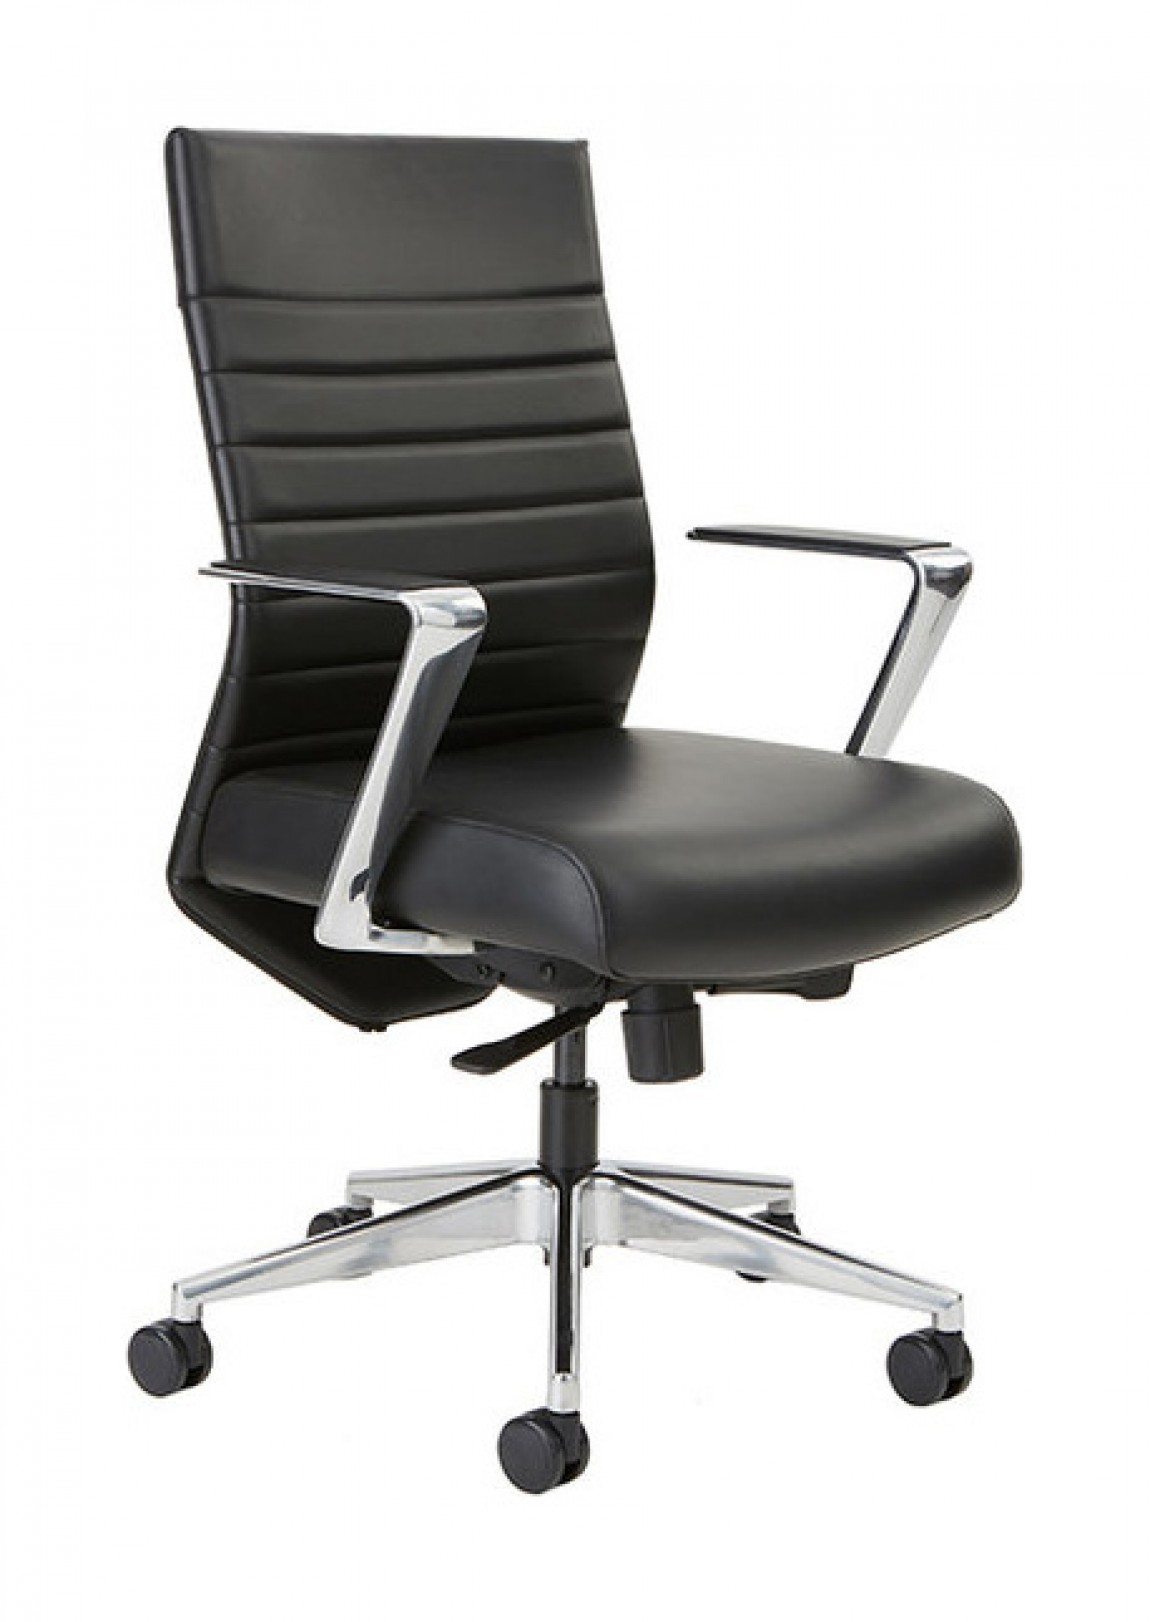 Conference room  chair